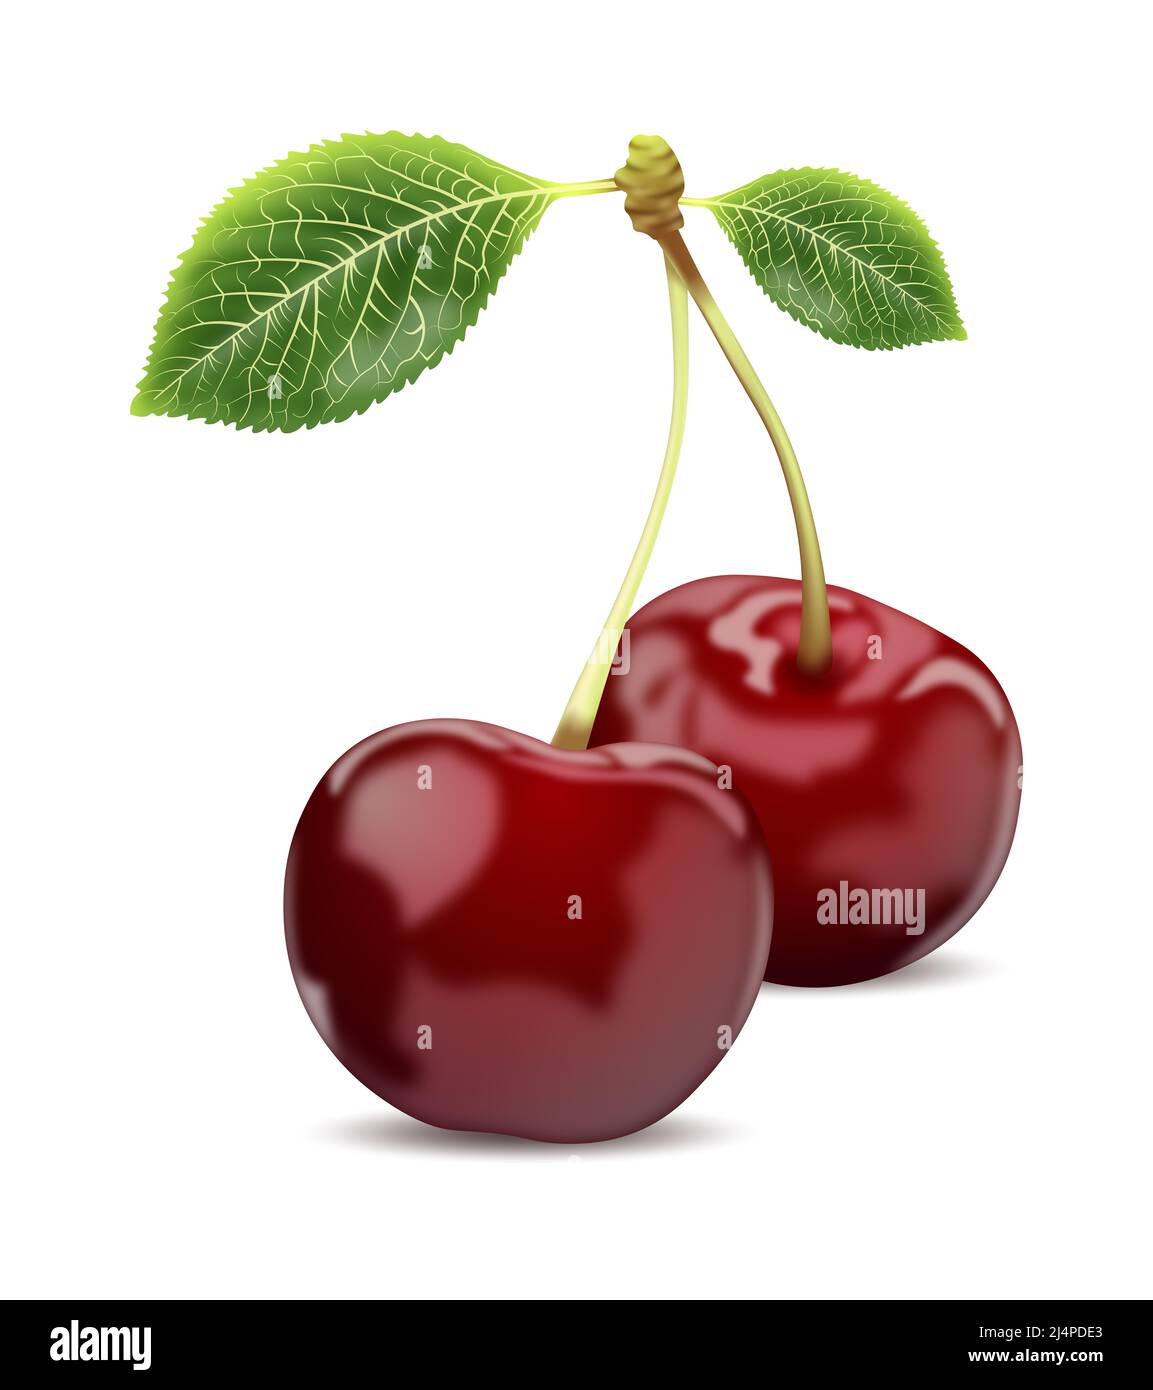 Illustration of isolated sweet cherry berries on the white background. Stock Photo